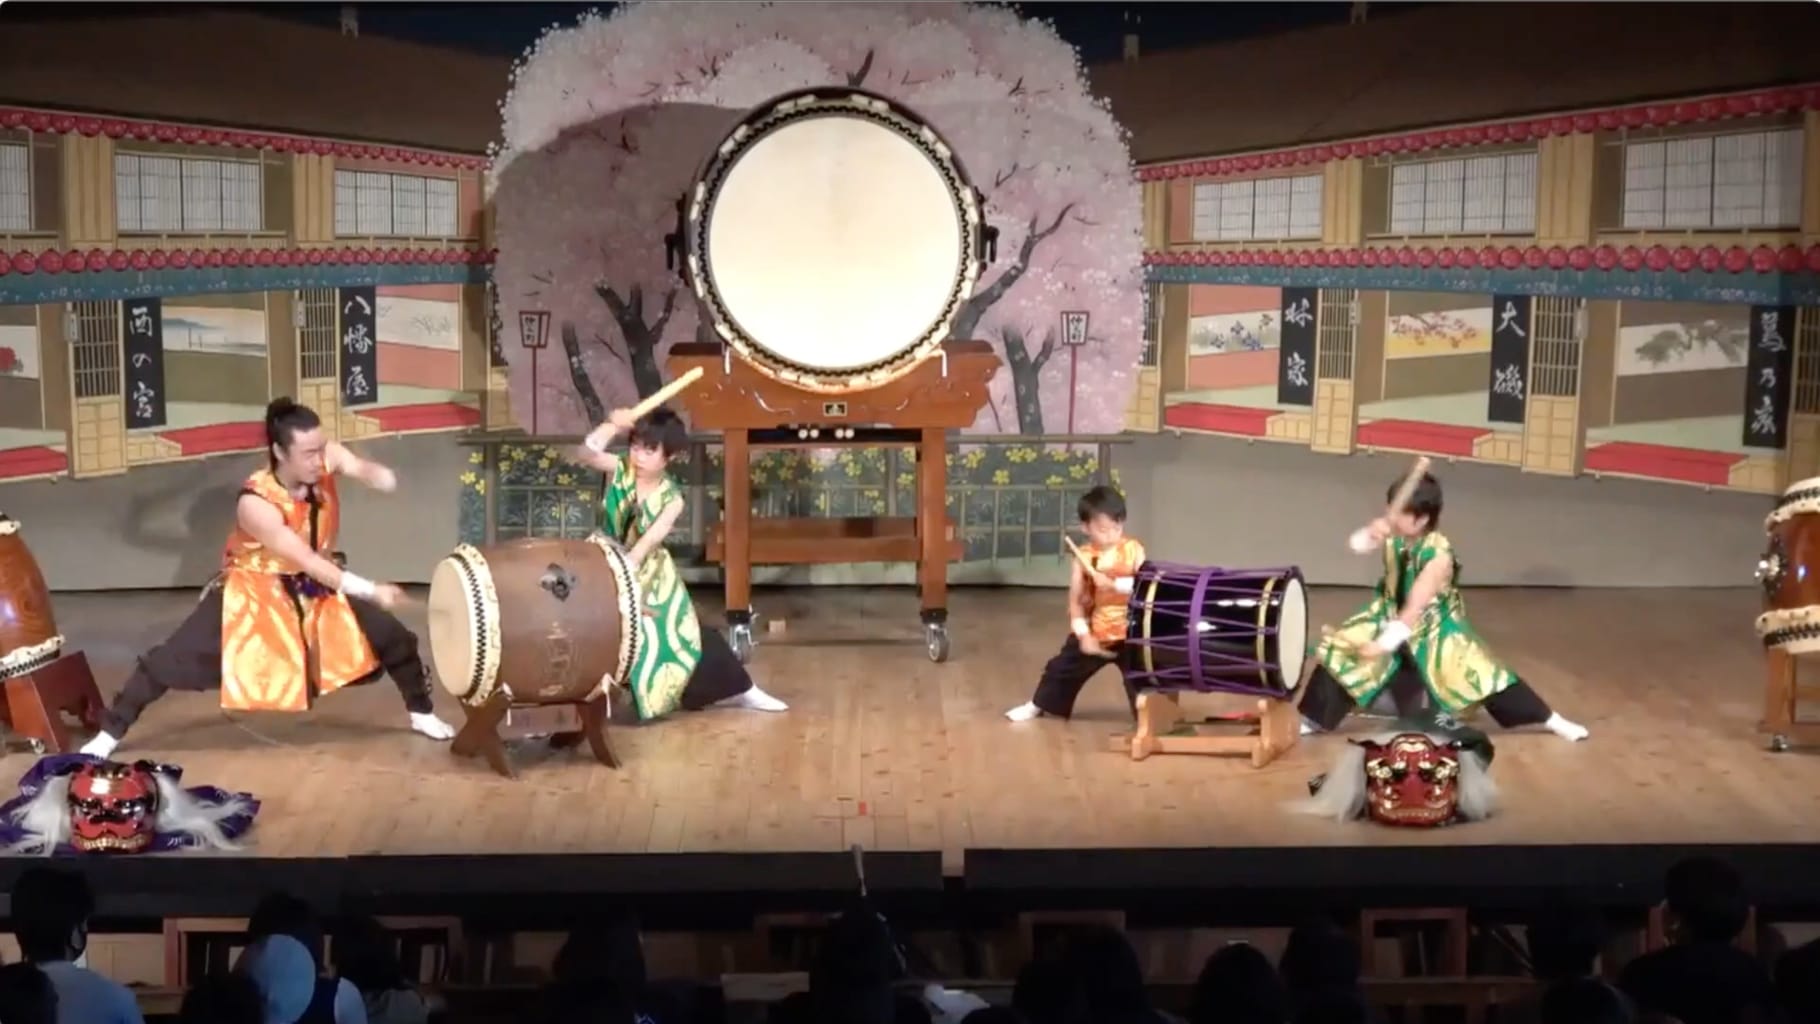 Takumi Kati and Peaceful Forest performing taiko drumming on stage